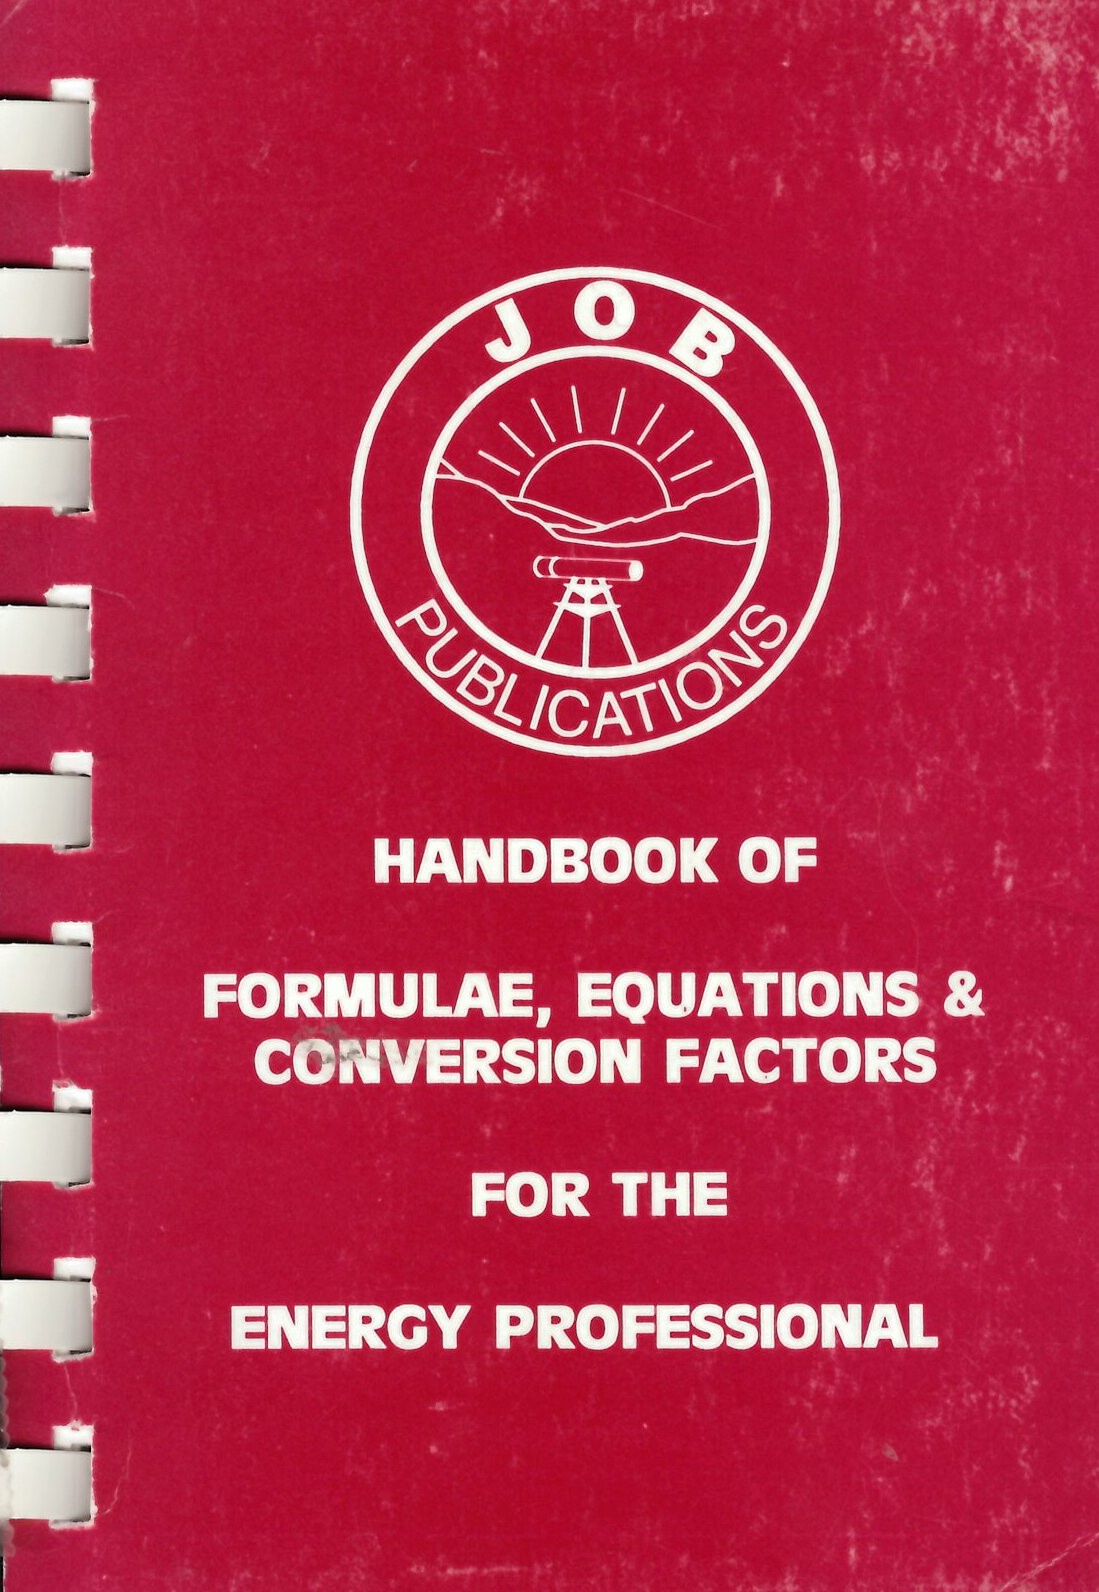 Handbook of formulae, equations, and conversion factors for the energy professional.